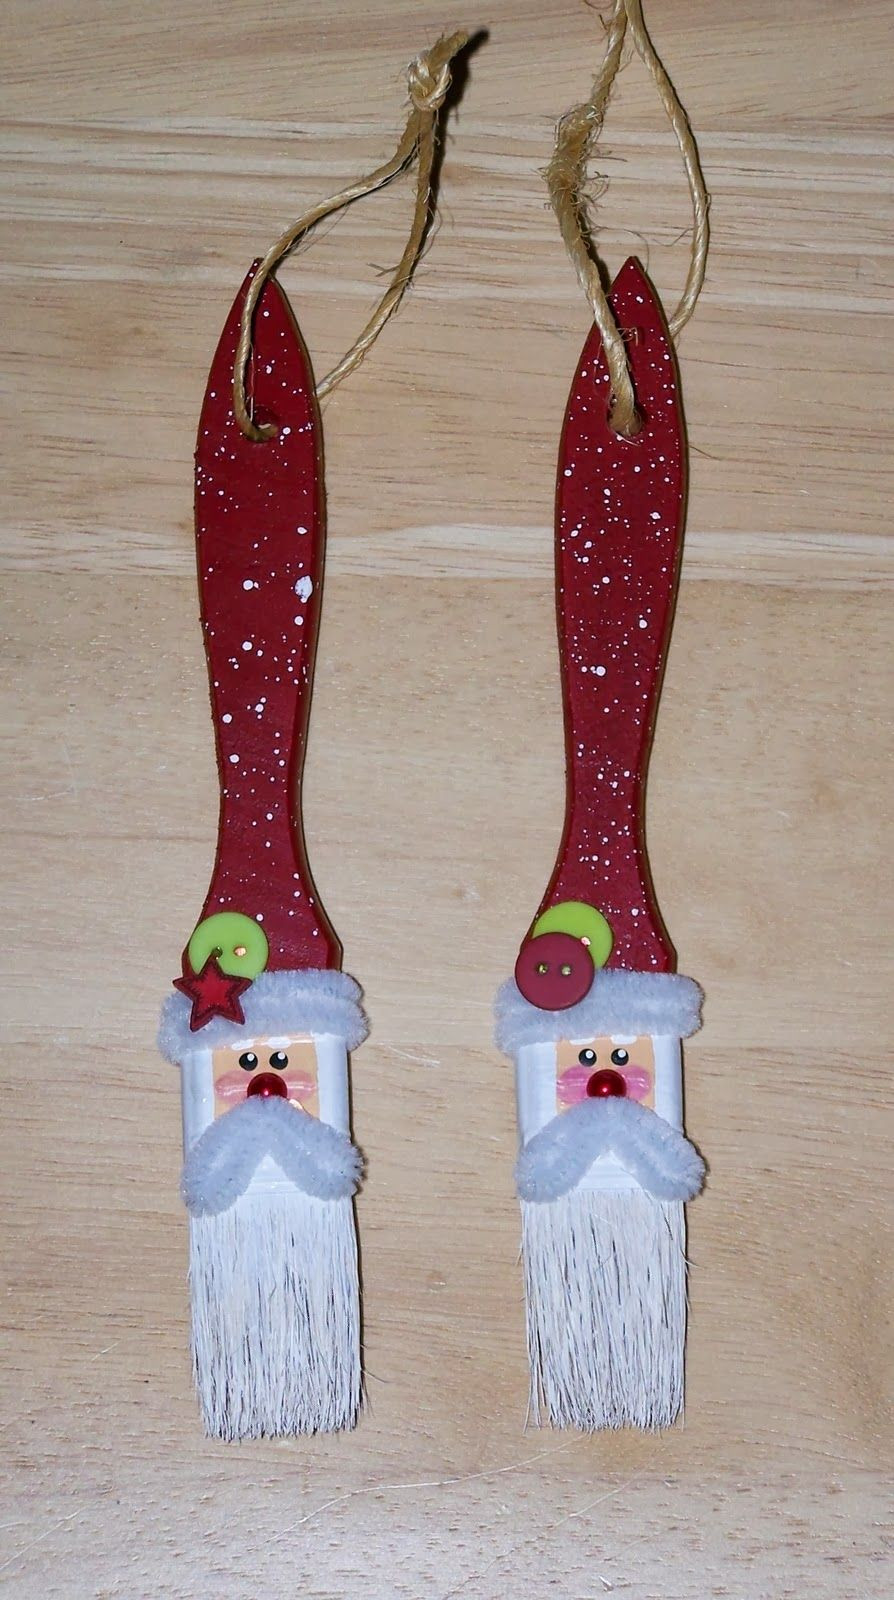 Pinterest DIY Christmas Crafts
 pinterest christmas crafts to sell – Google Search More